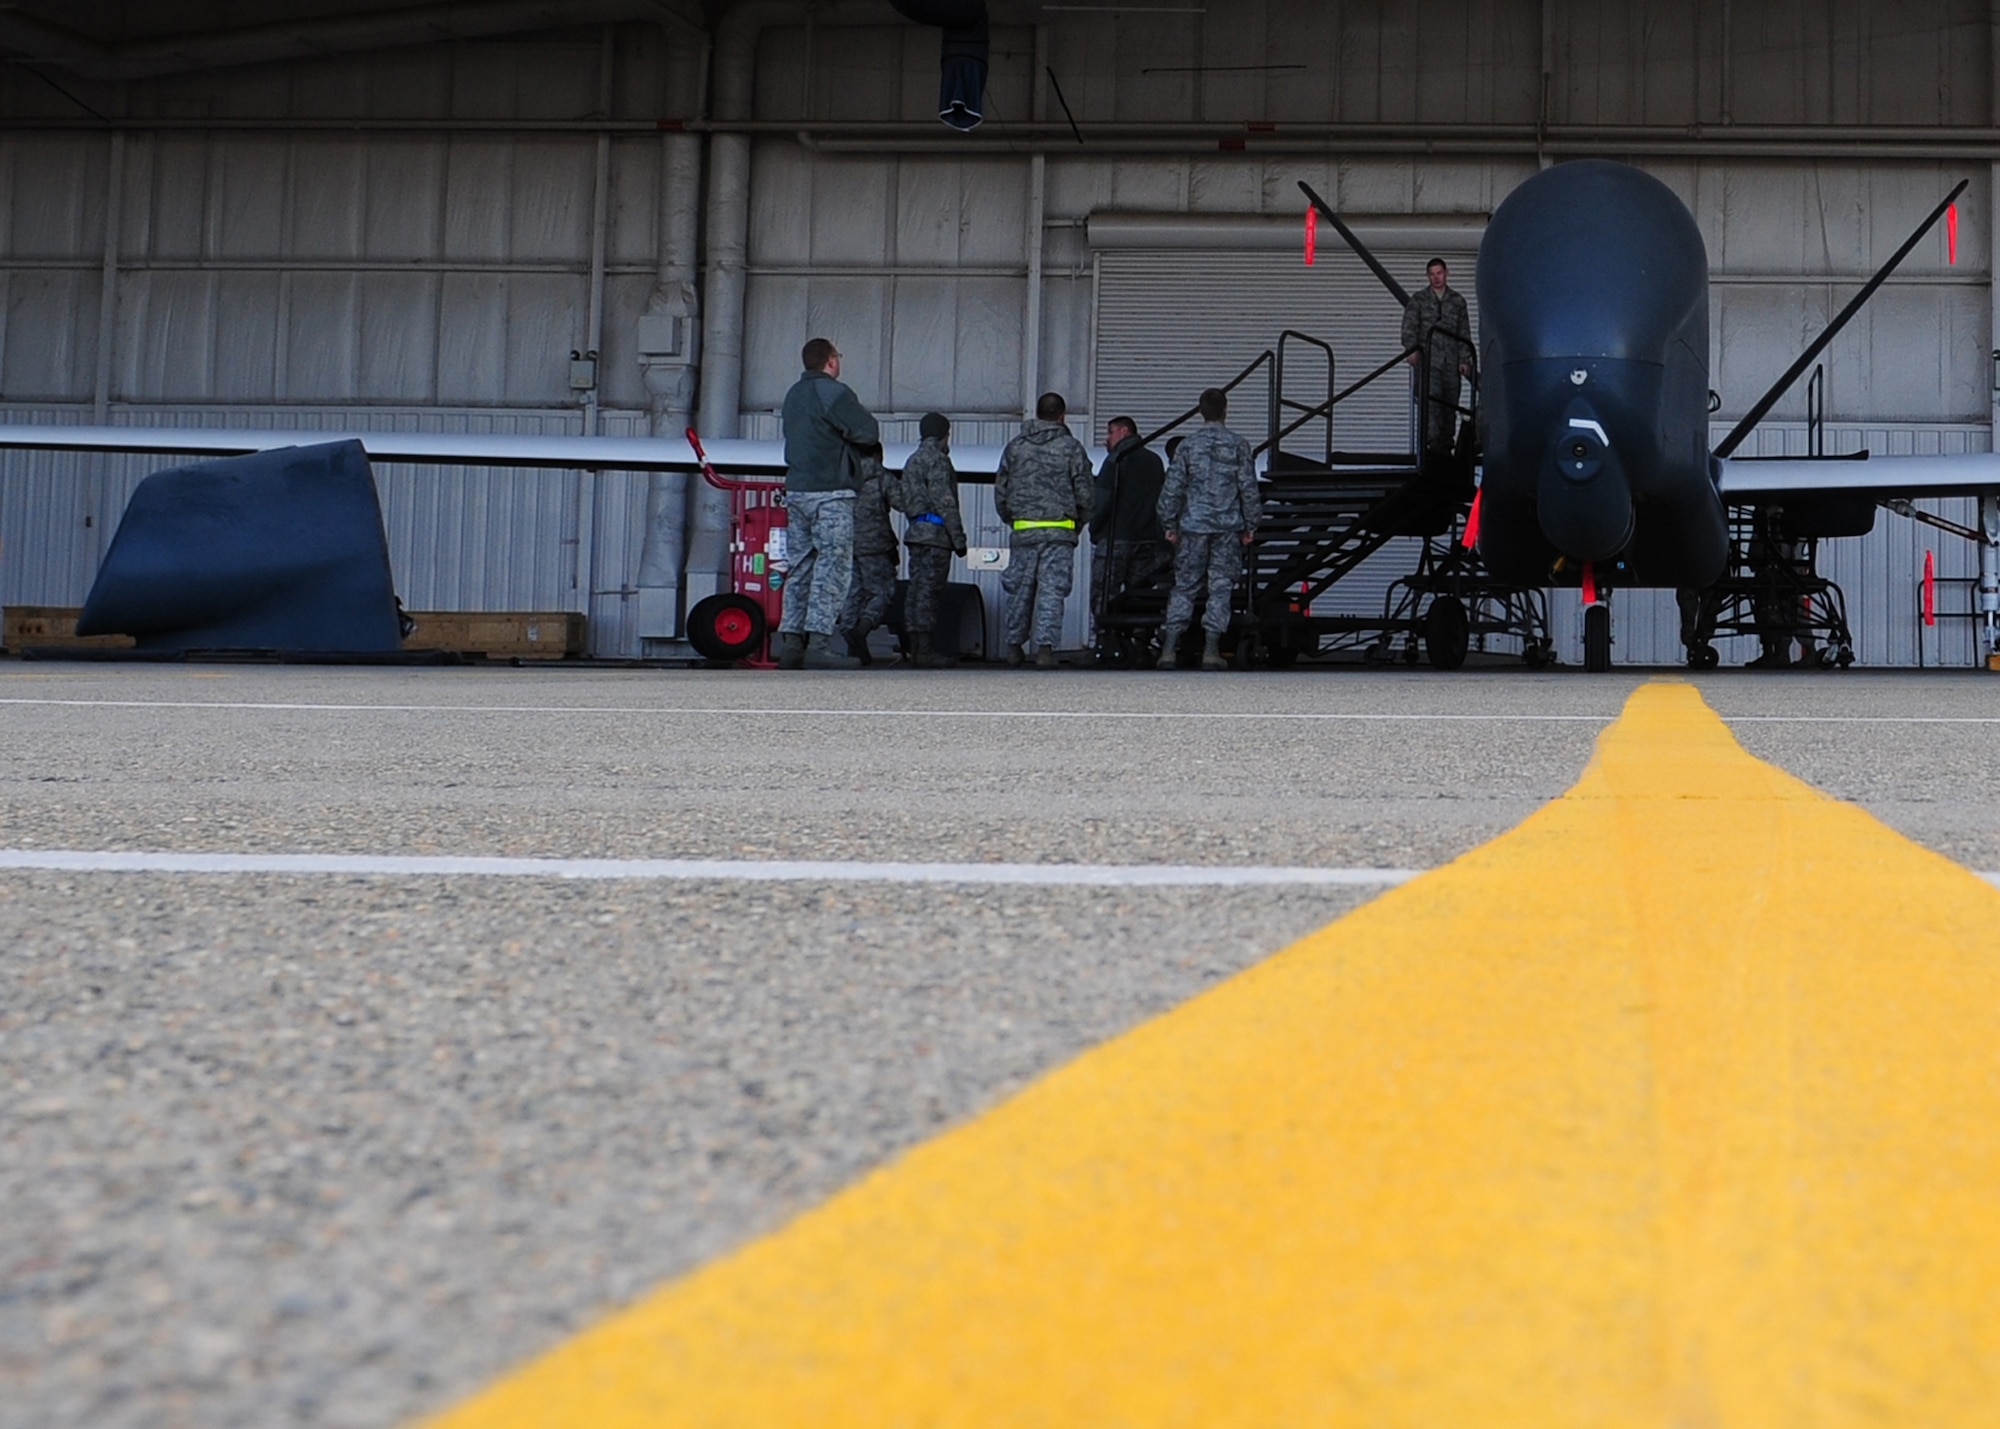 Airmen from the 9th Aircraft Maintenance Squadron prepare to place the forward nacelle air intake on an Air Force RQ-4 Global Hawk intelligence, surveillance and reconnaissance aircraft Dec. 19, 2012, at Beale Air Force Base, Calif. The part was repaired off the aircraft to ensure no dust or debris damaged internal parts. (U.S. Air Force photo by Senior Airman Shawn Nickel/Released)